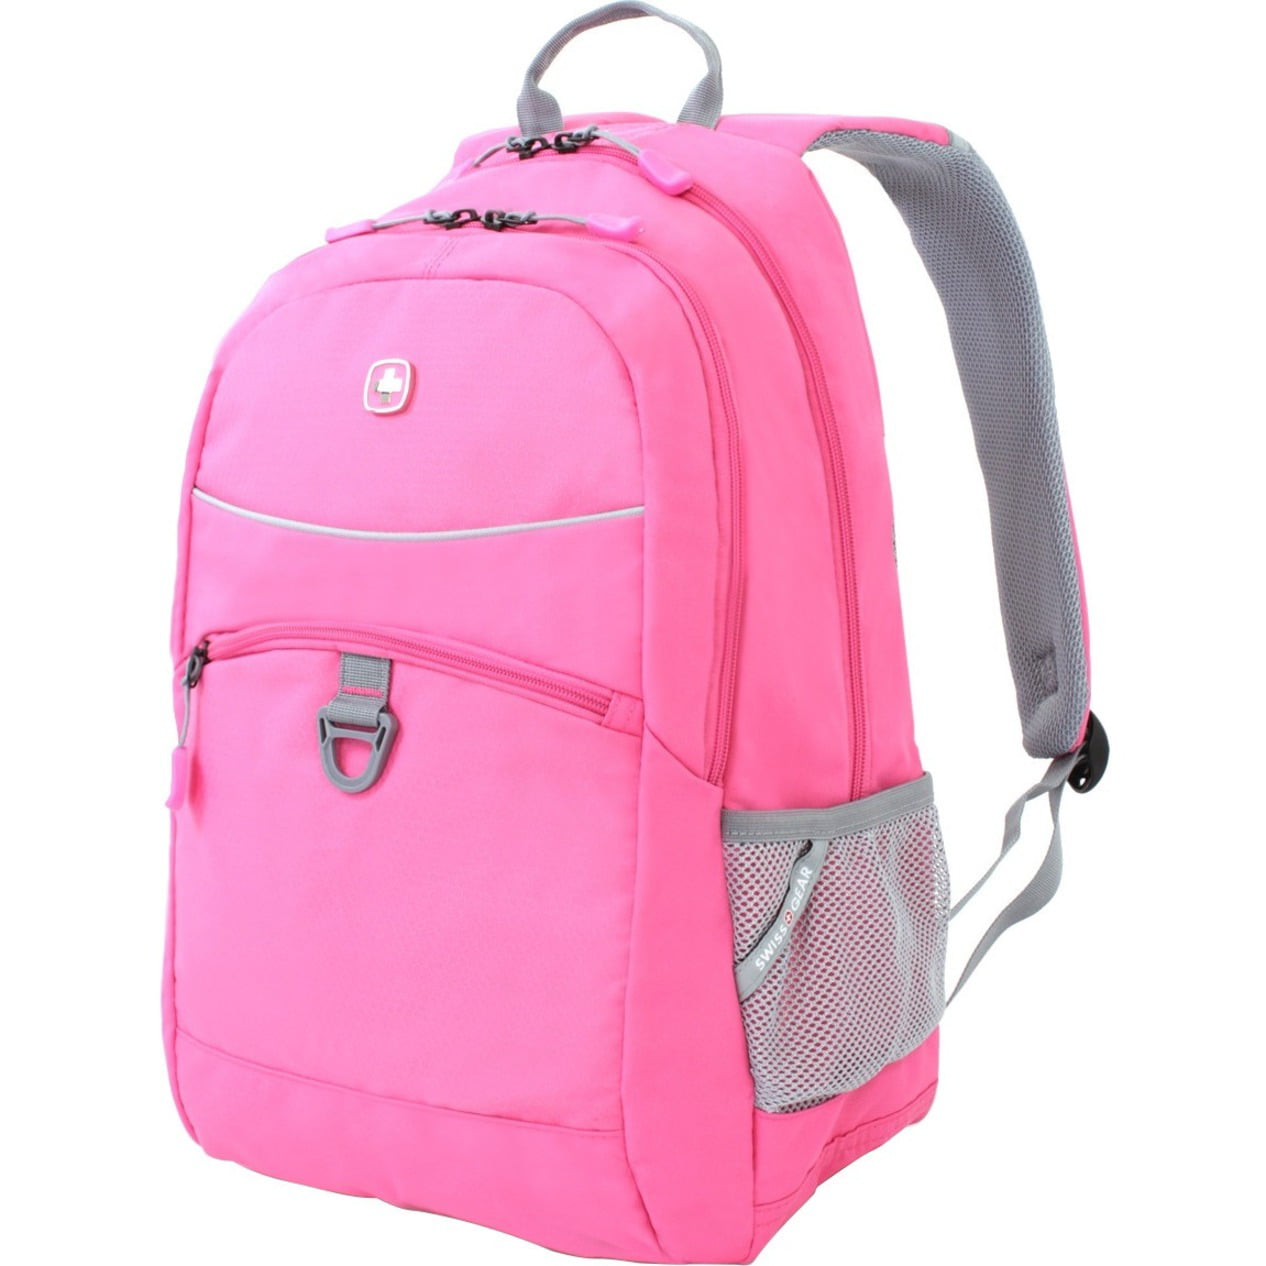 6651824408 Polyester Tablet Backpack - Bubble Gum Pink, 18 inch ...